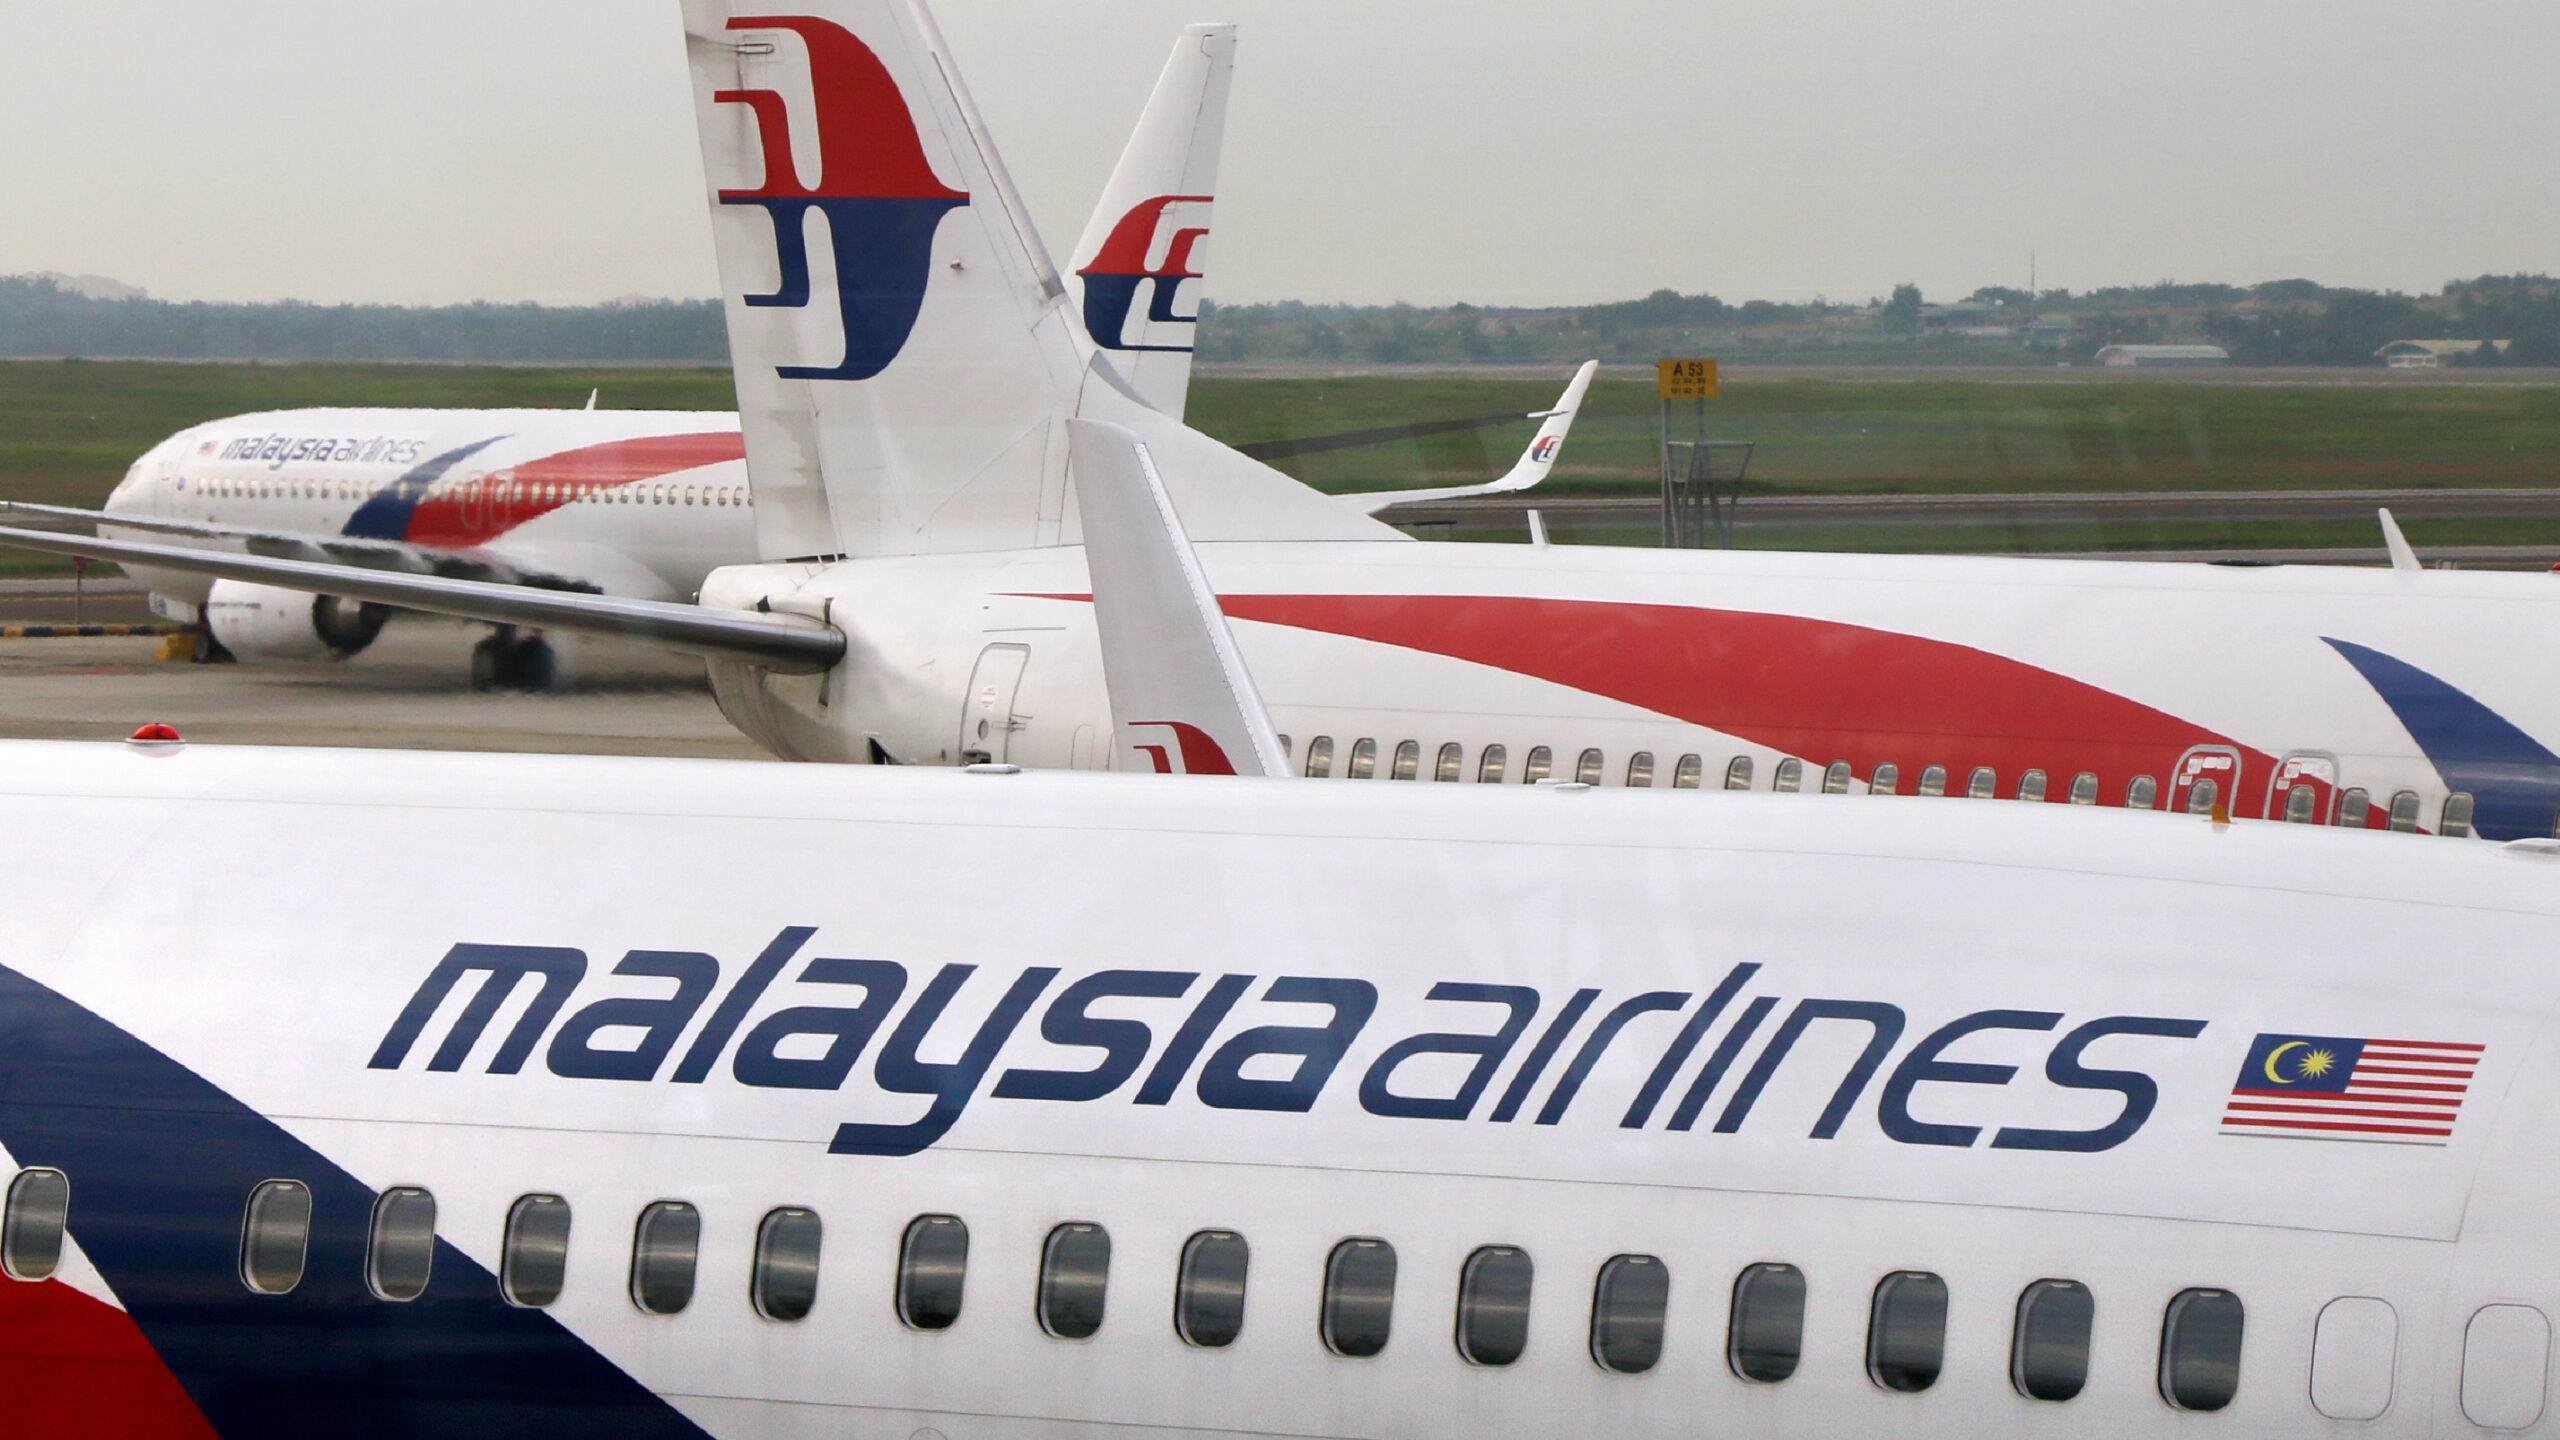 Malaysia Airline 马航